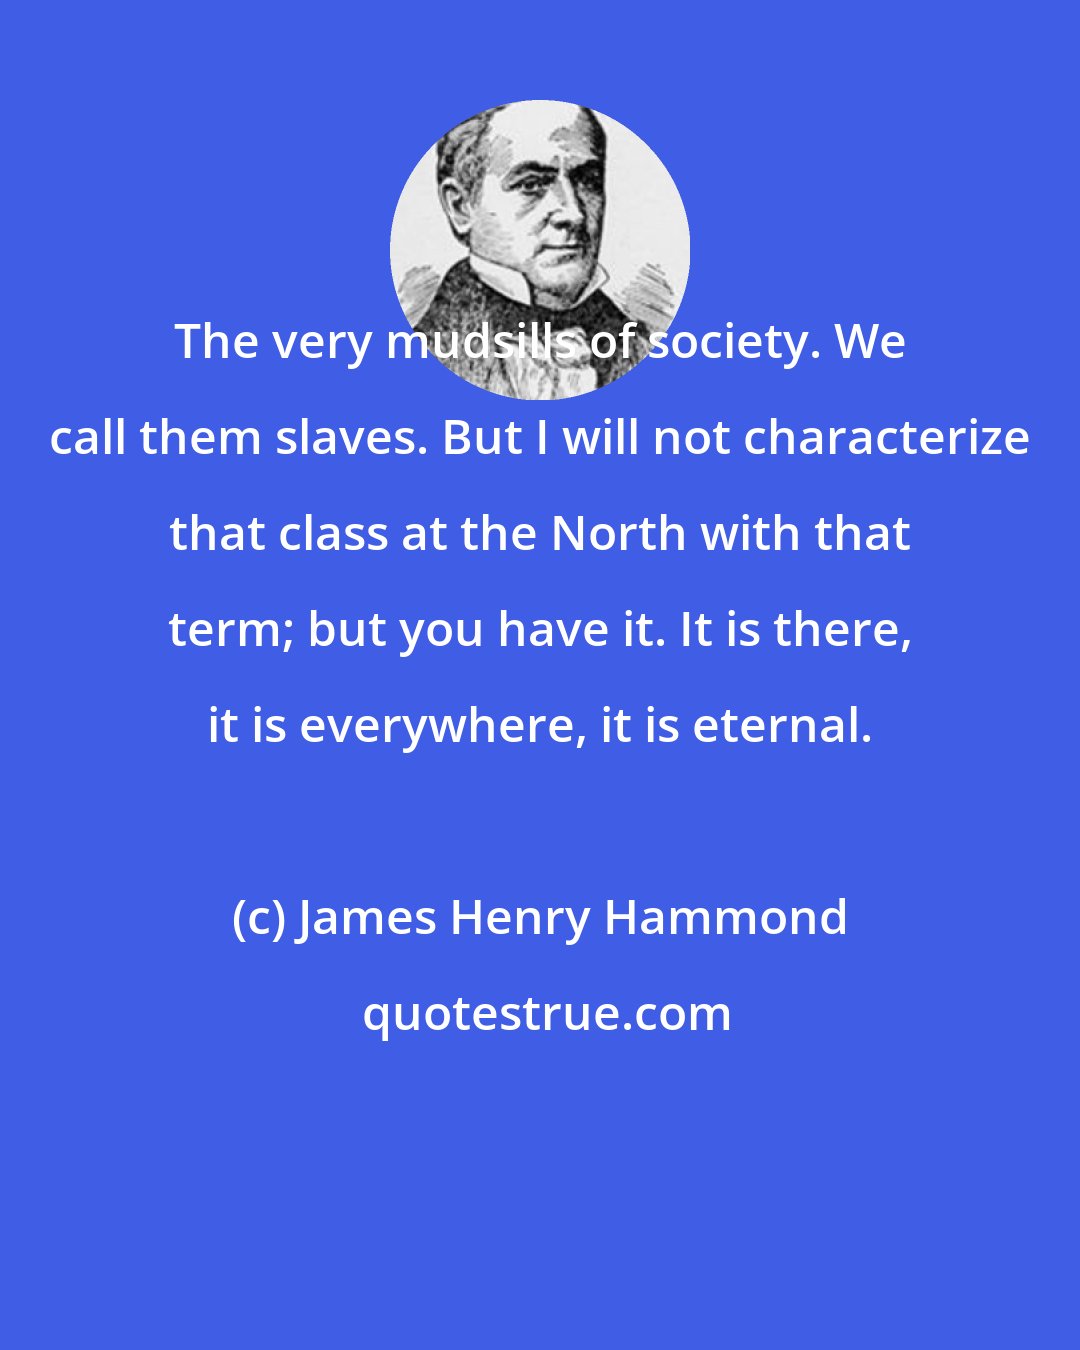 James Henry Hammond: The very mudsills of society. We call them slaves. But I will not characterize that class at the North with that term; but you have it. It is there, it is everywhere, it is eternal.